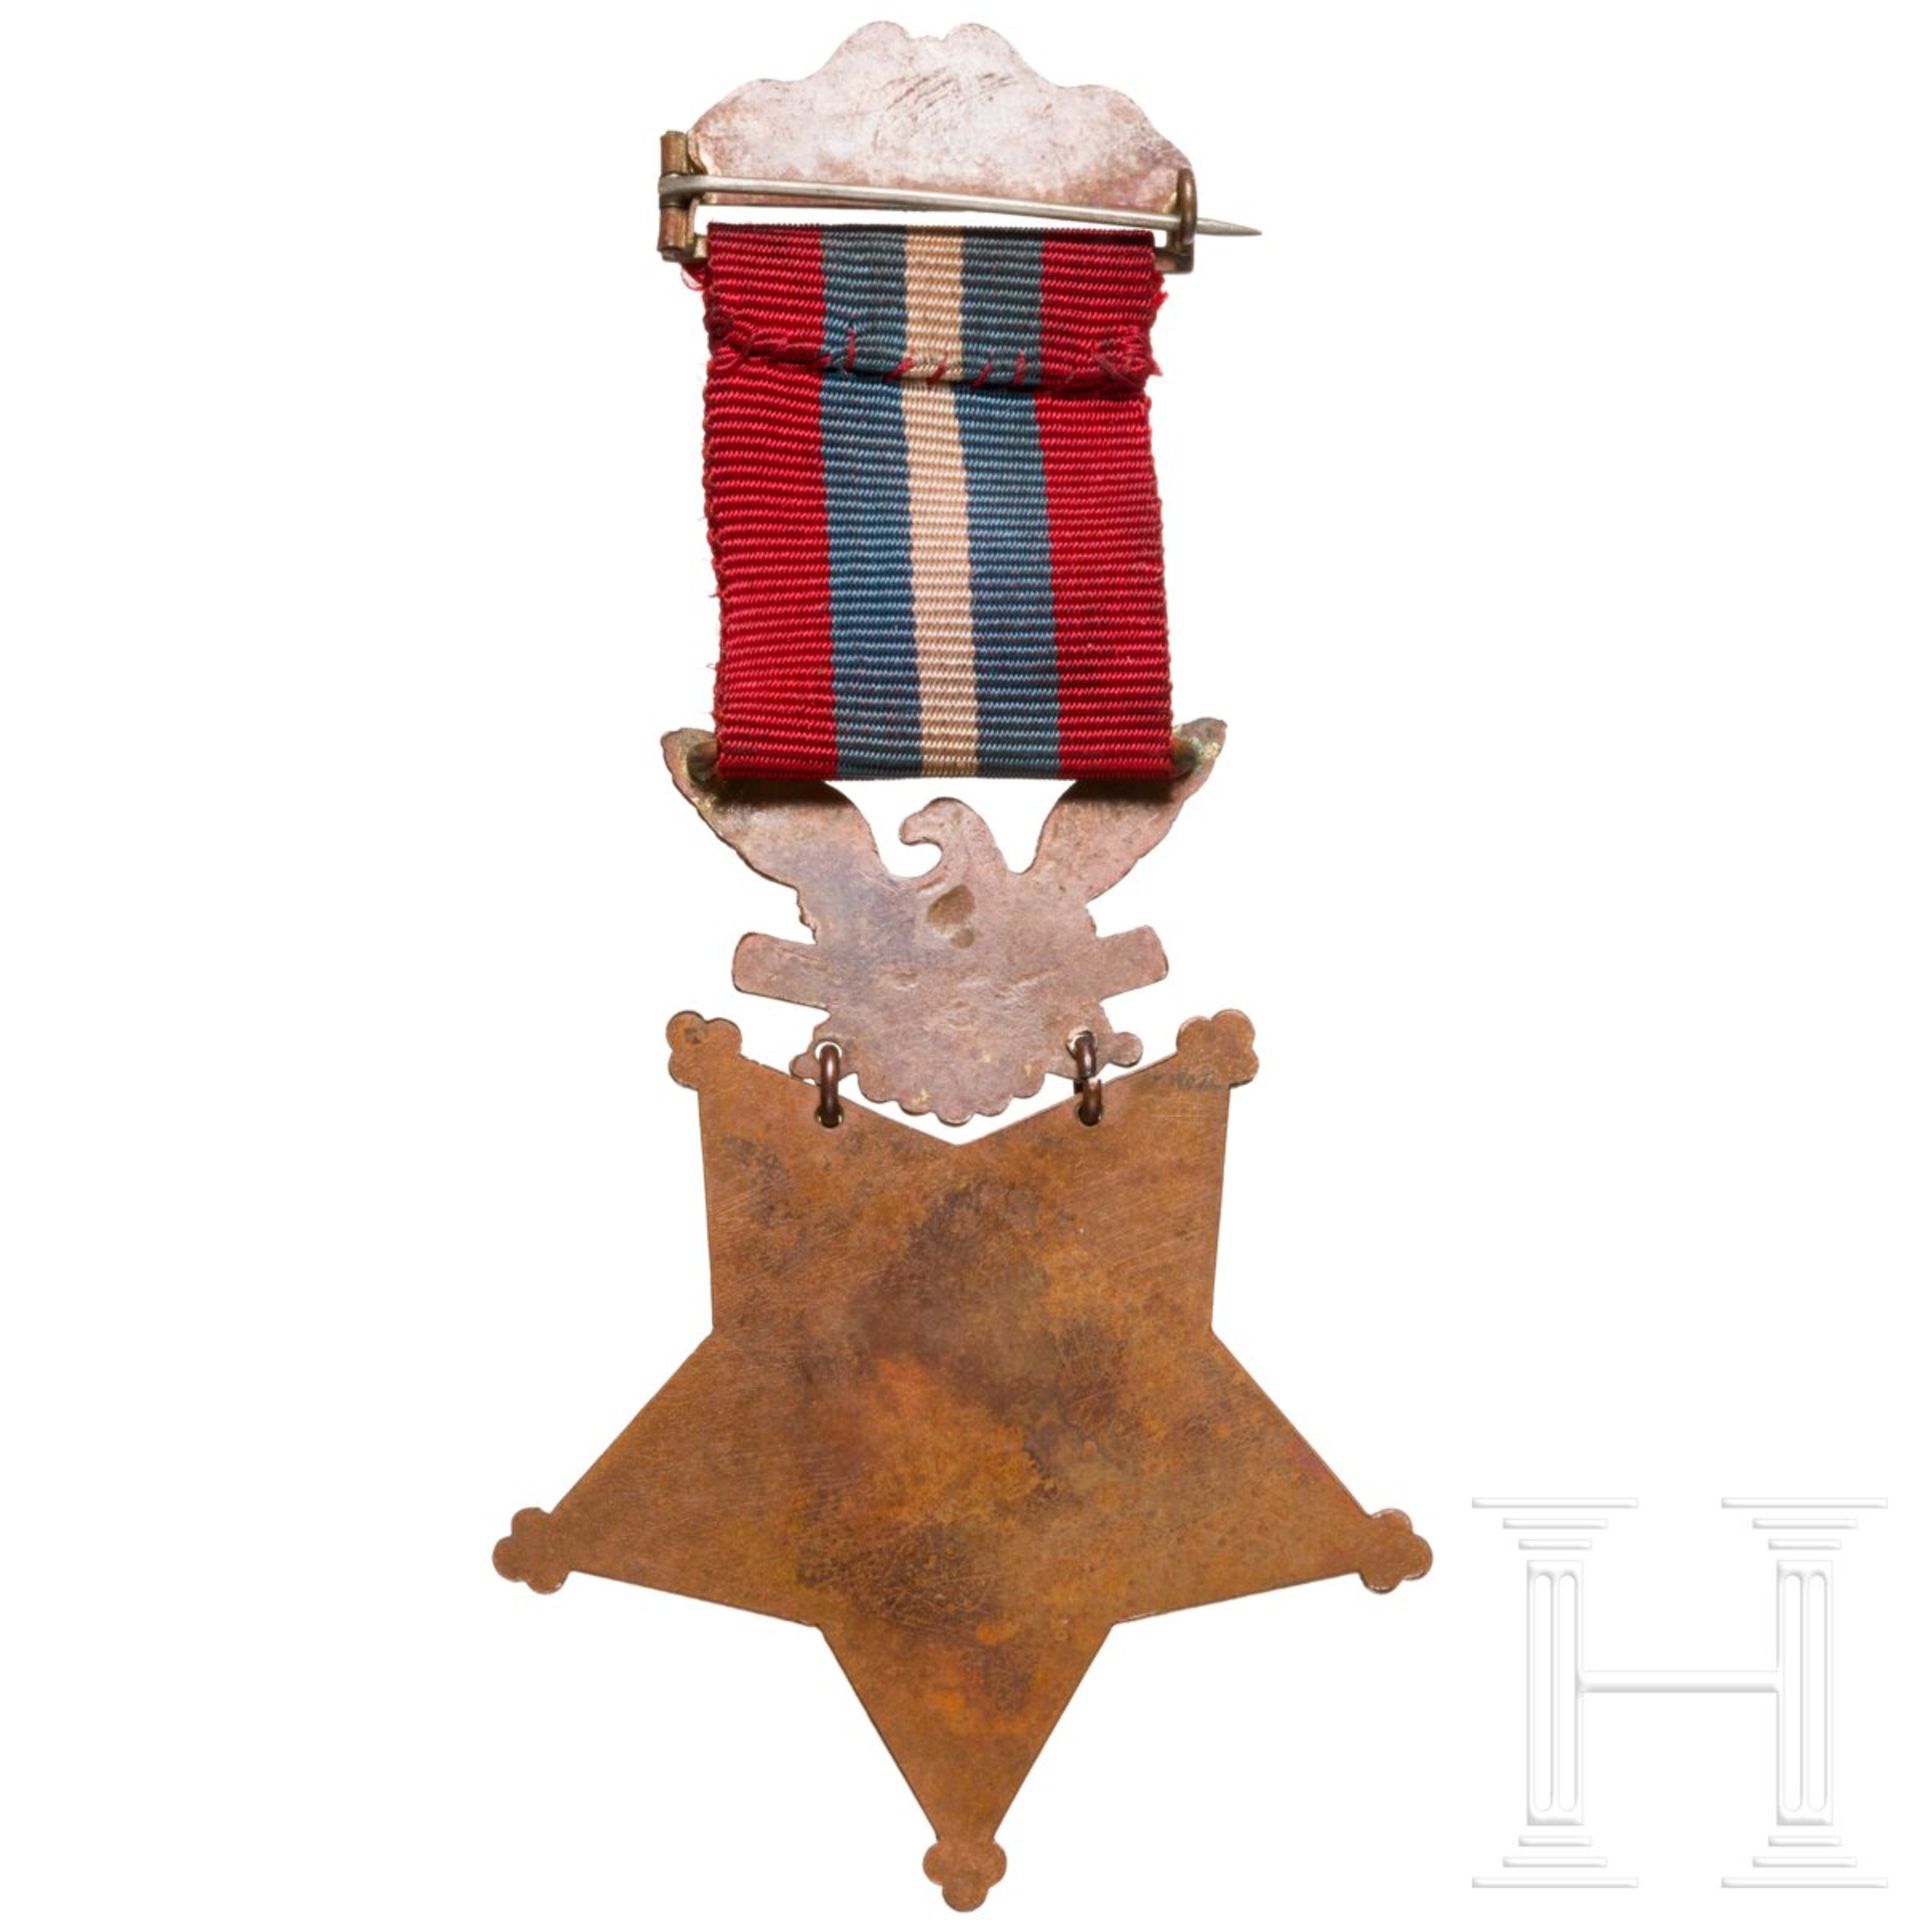 Congressional Medal of Honor in Armeeausführung 1896 - 1904, unverausgabtes Exemplar - Image 2 of 3